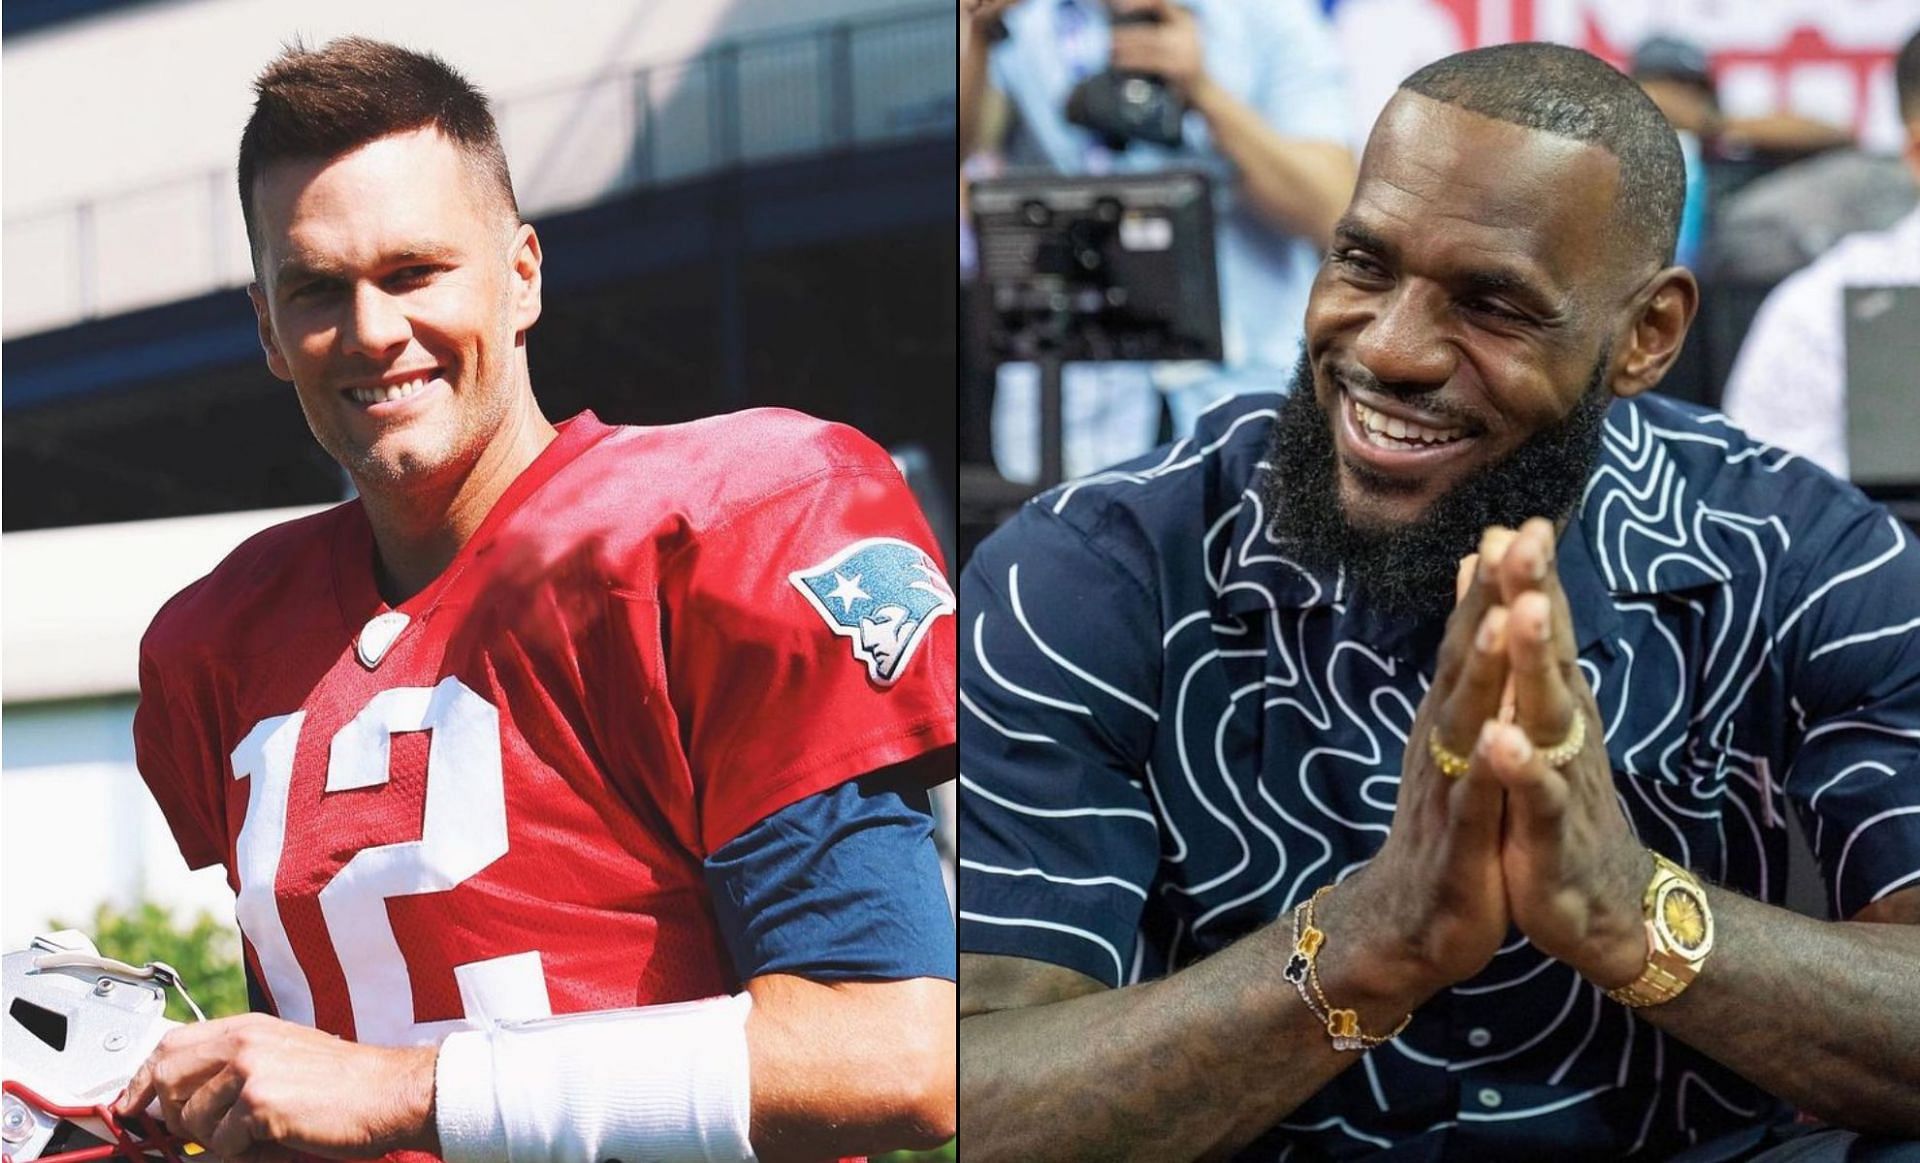 Tom Brady invited LeBron James to play tight end